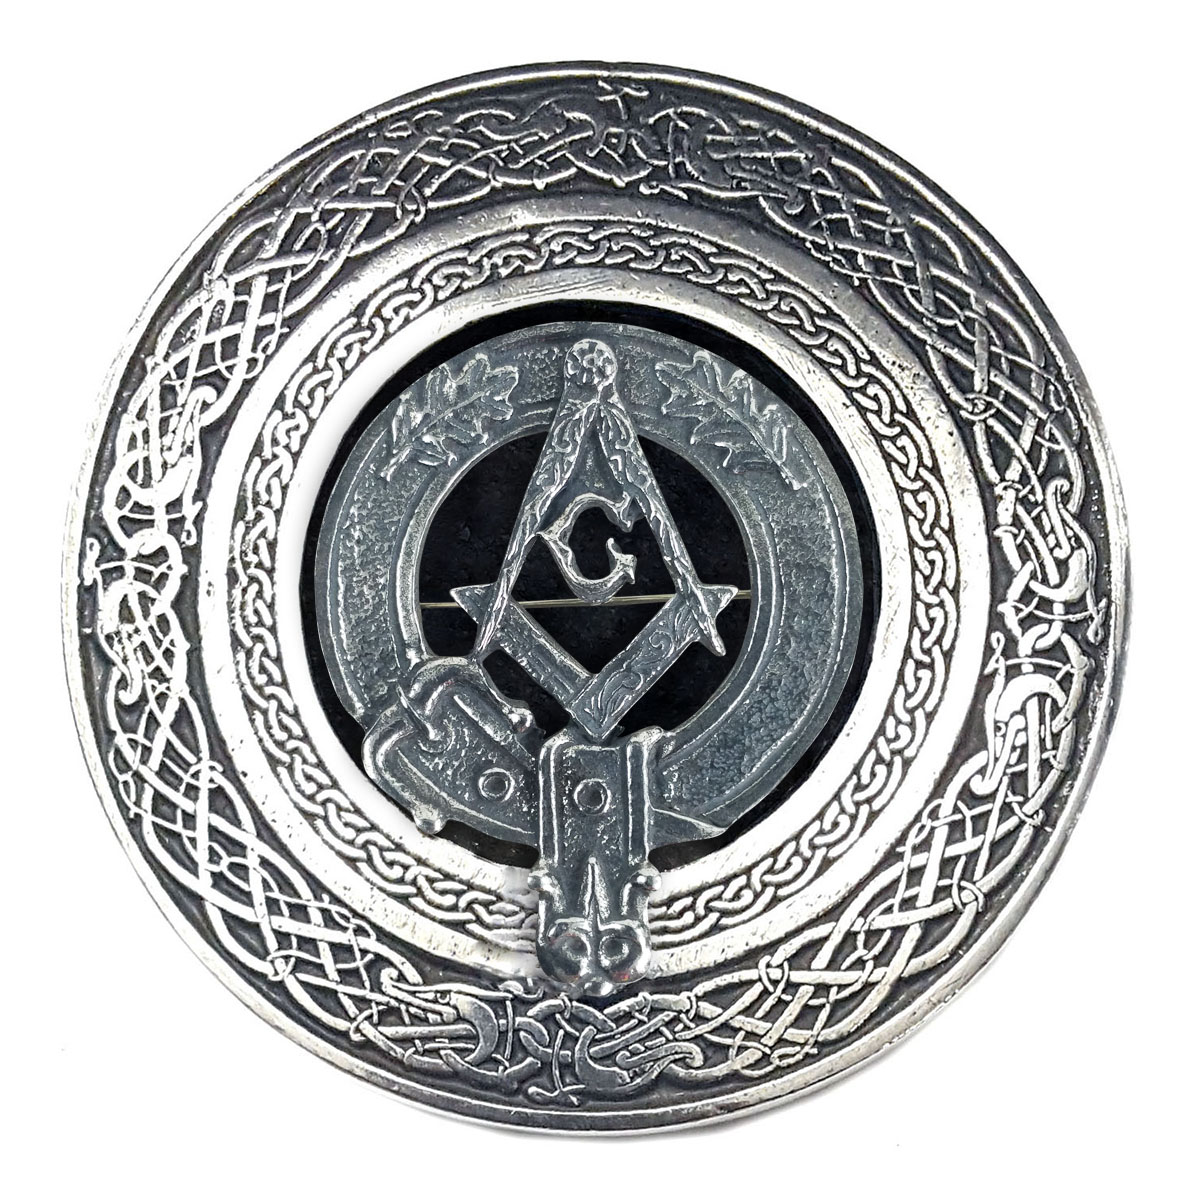 The Masonic Round Pewter Kilt Belt Buckle is shown on a round silver plate.